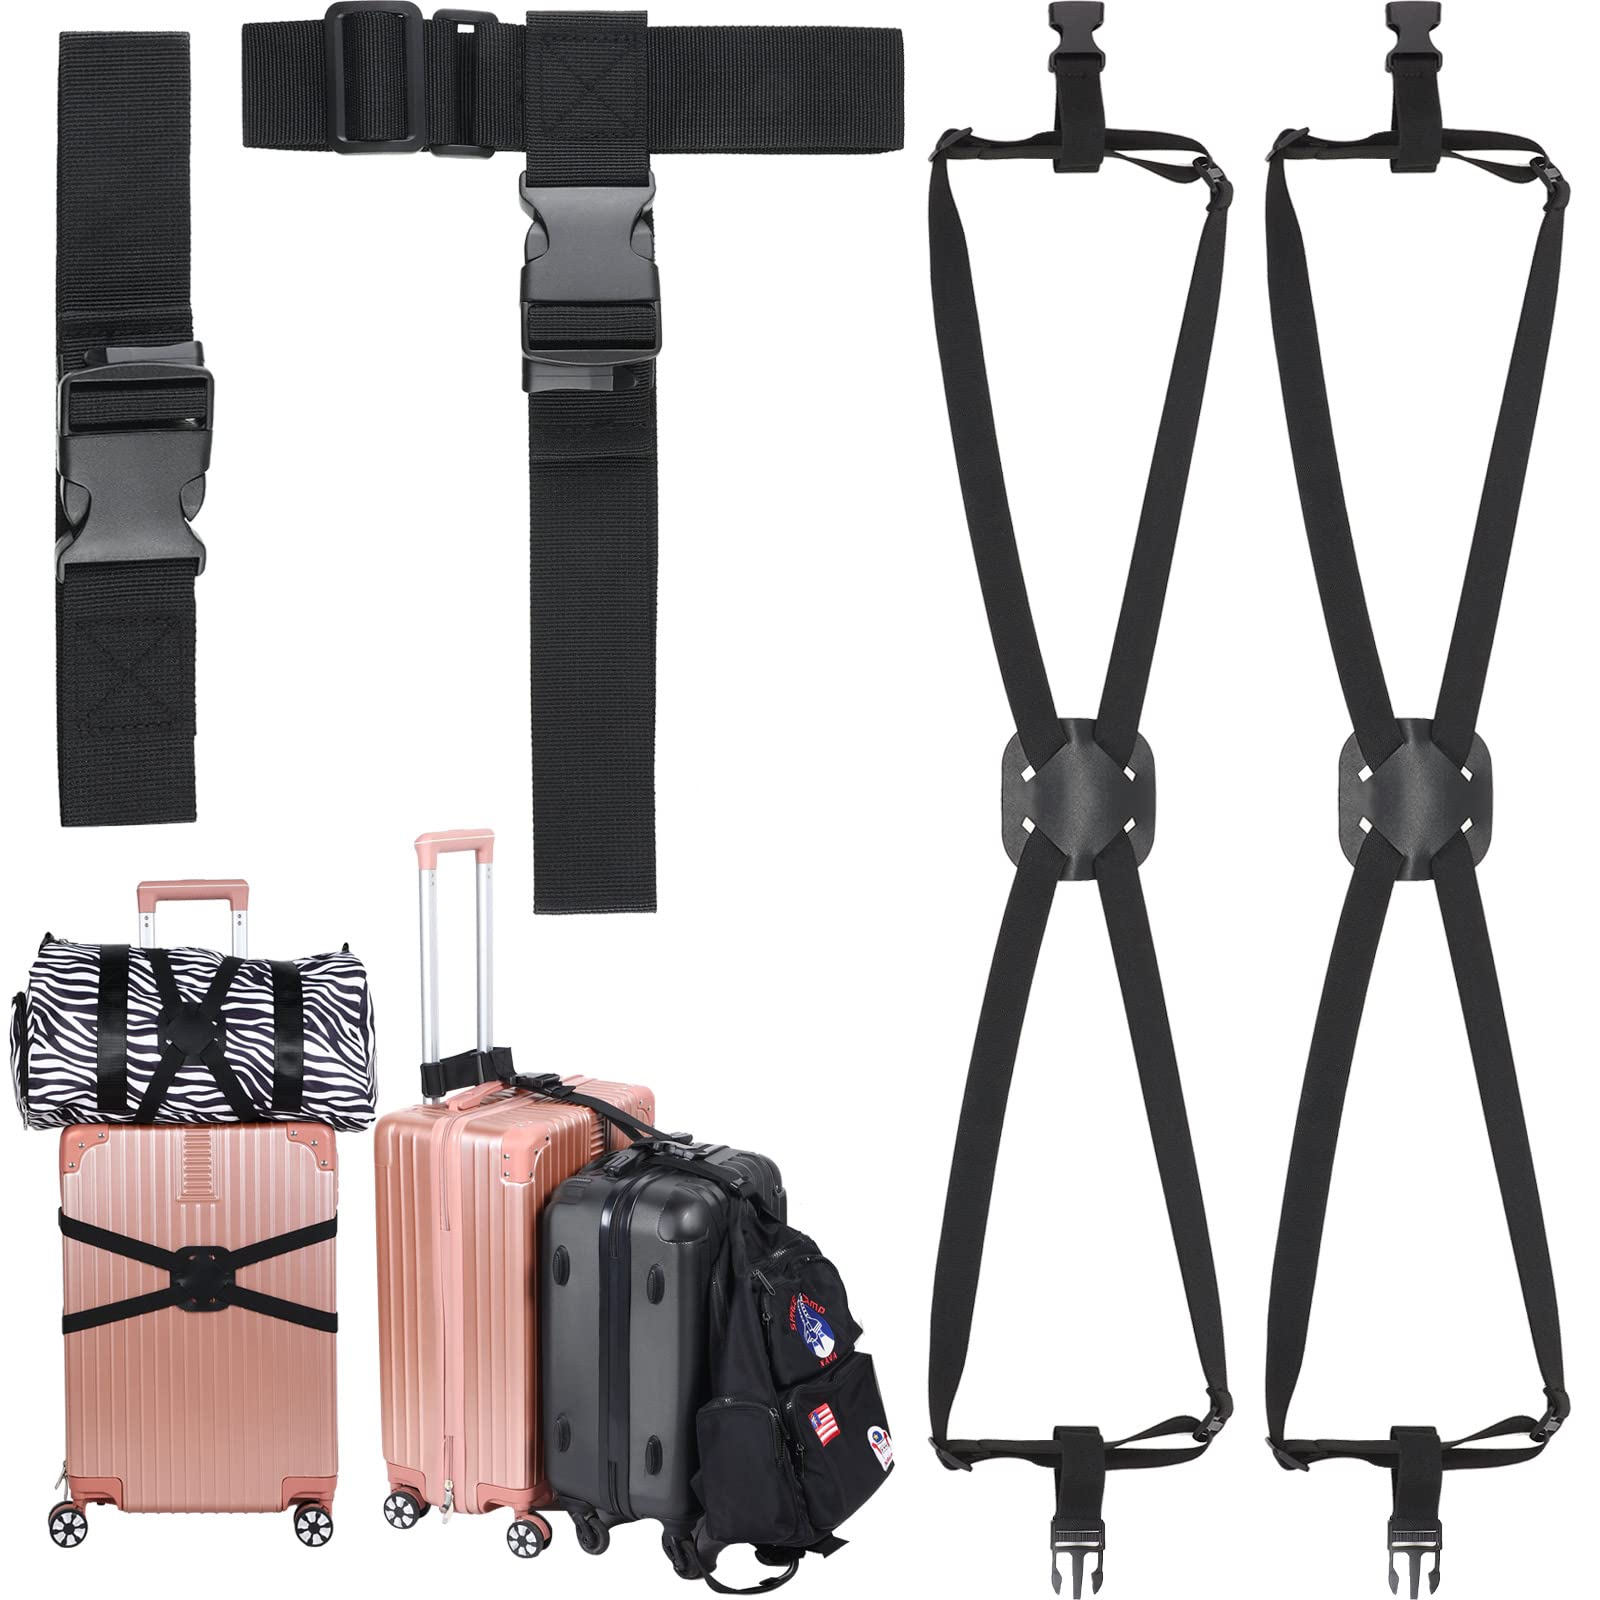 What Are The Bungee Straps For On A Samsonite Duffel Bag | TouristSecrets